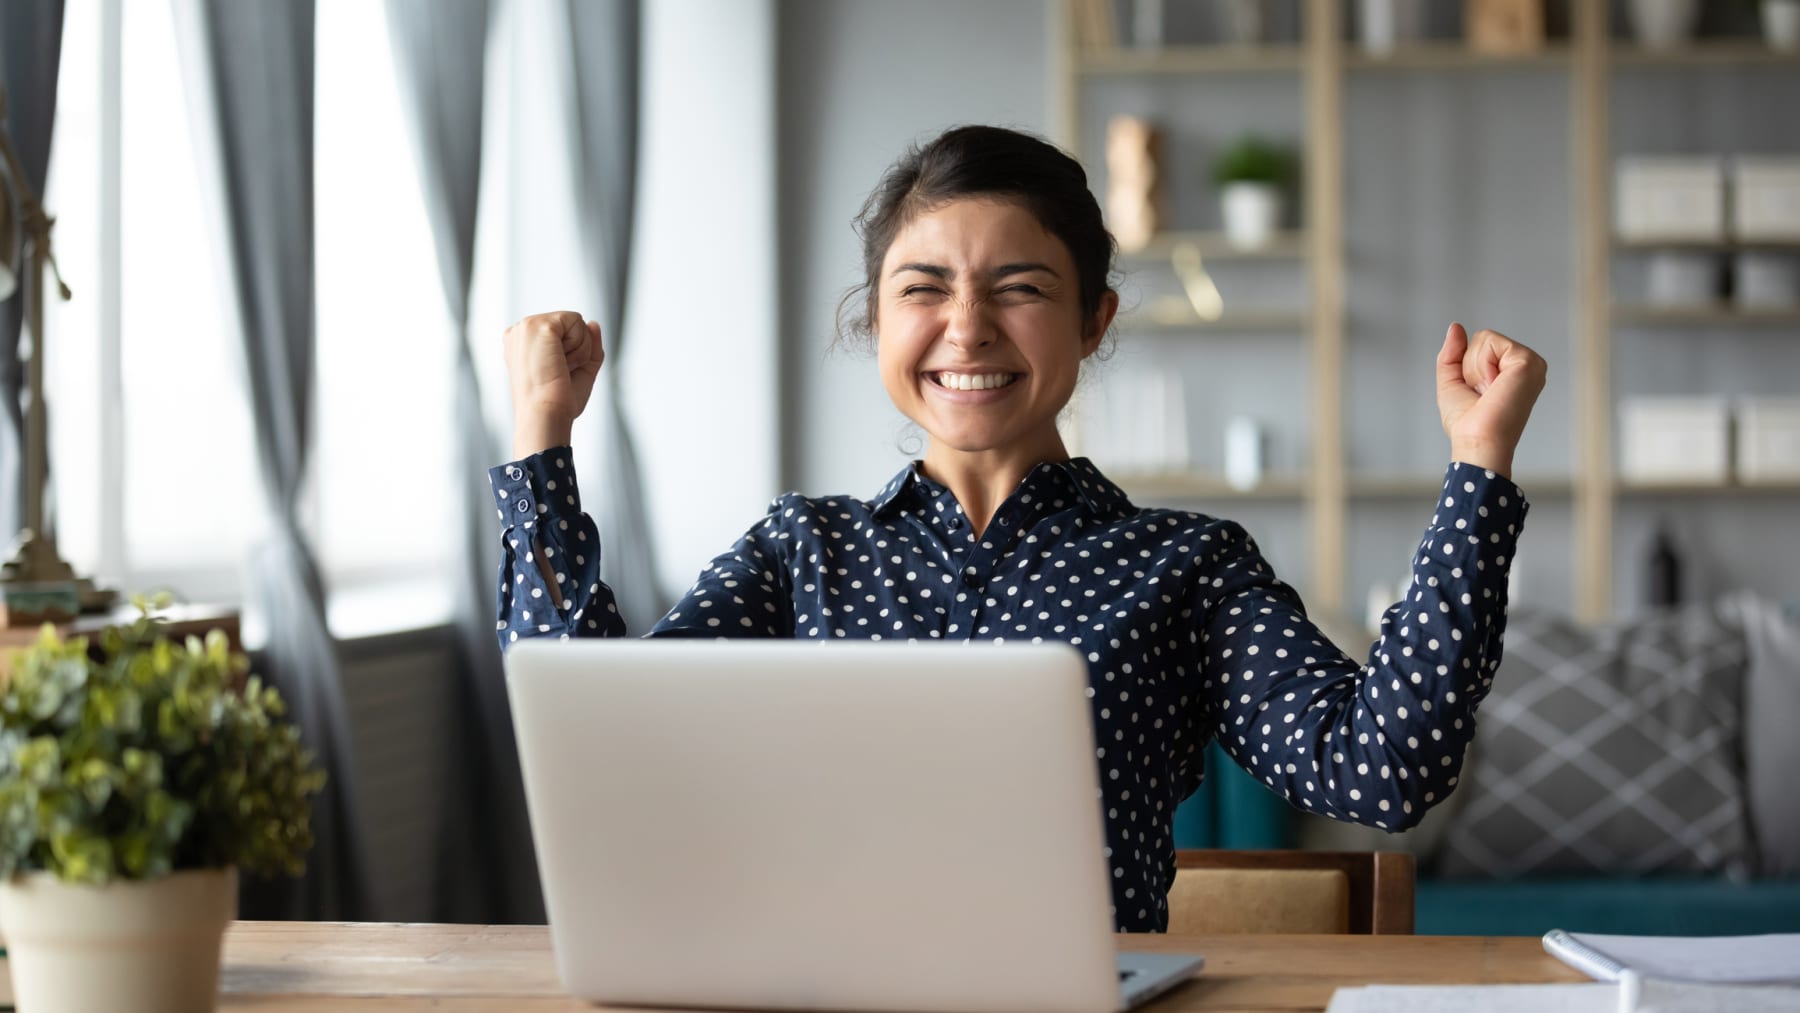 Young woman celebrates in front of laptop.